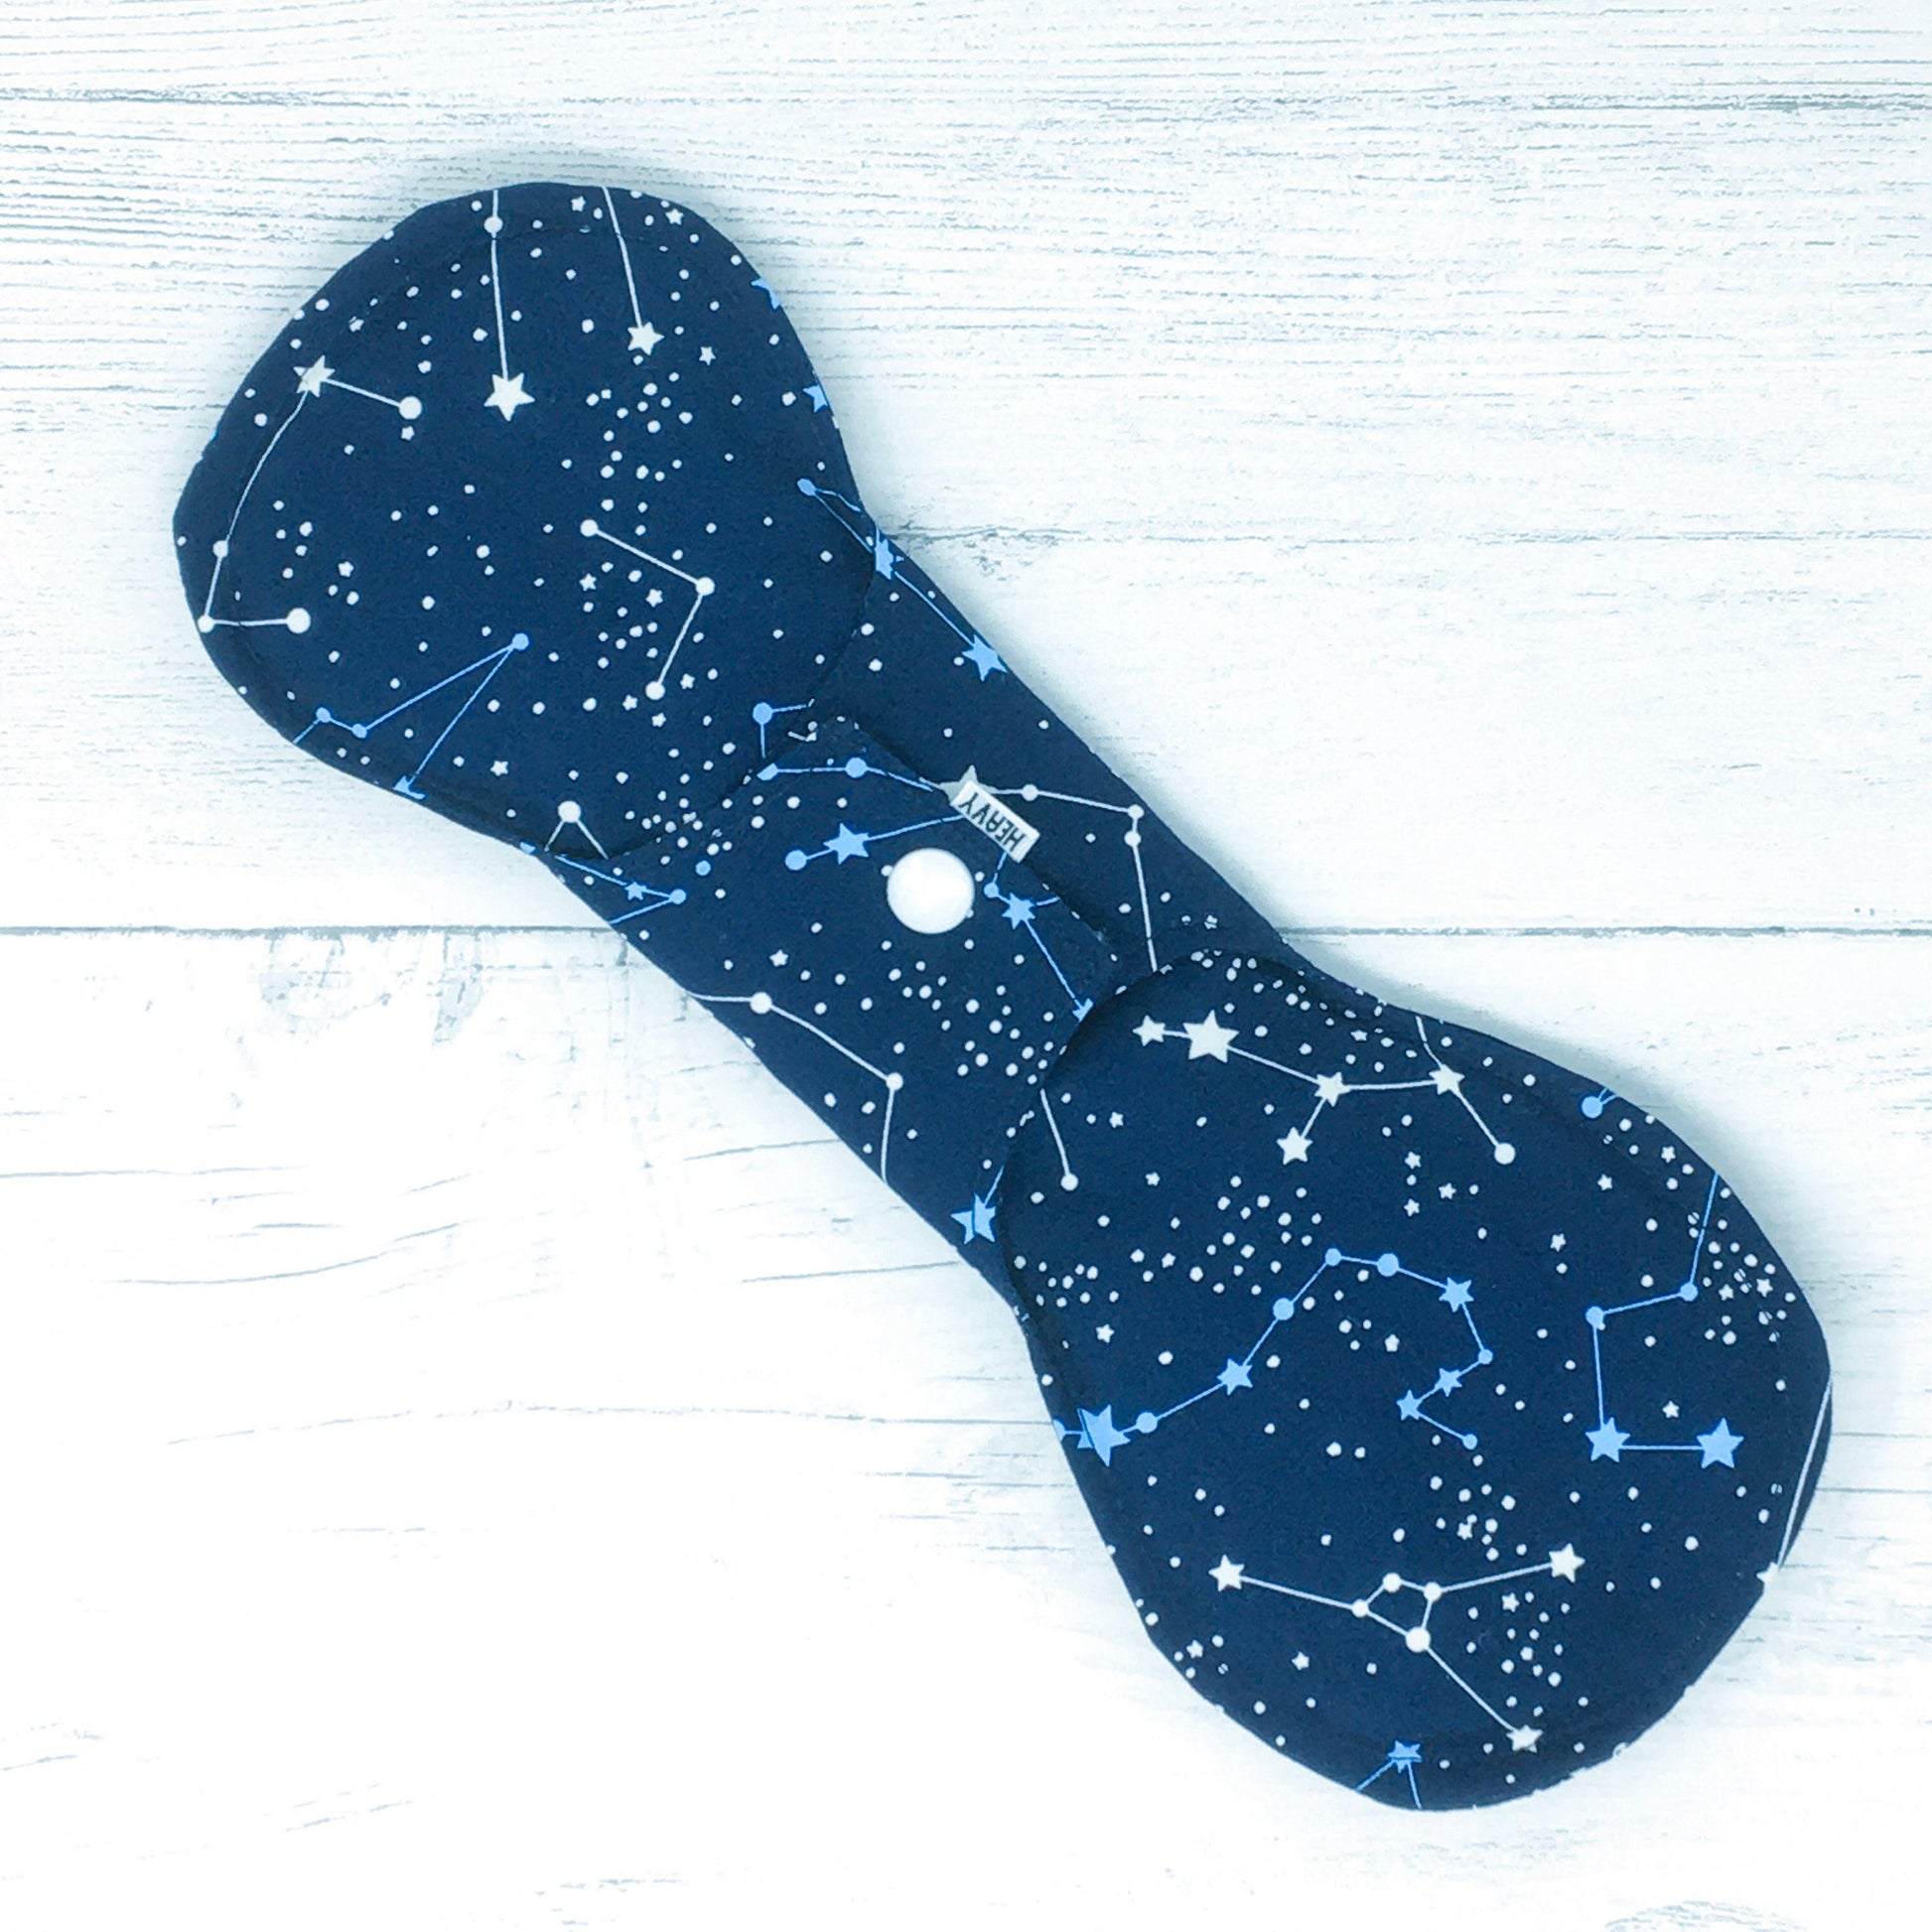 11" Reusable menstrual pad with pattern of constellations on a navy cotton fabric. Reverse of fastened pad